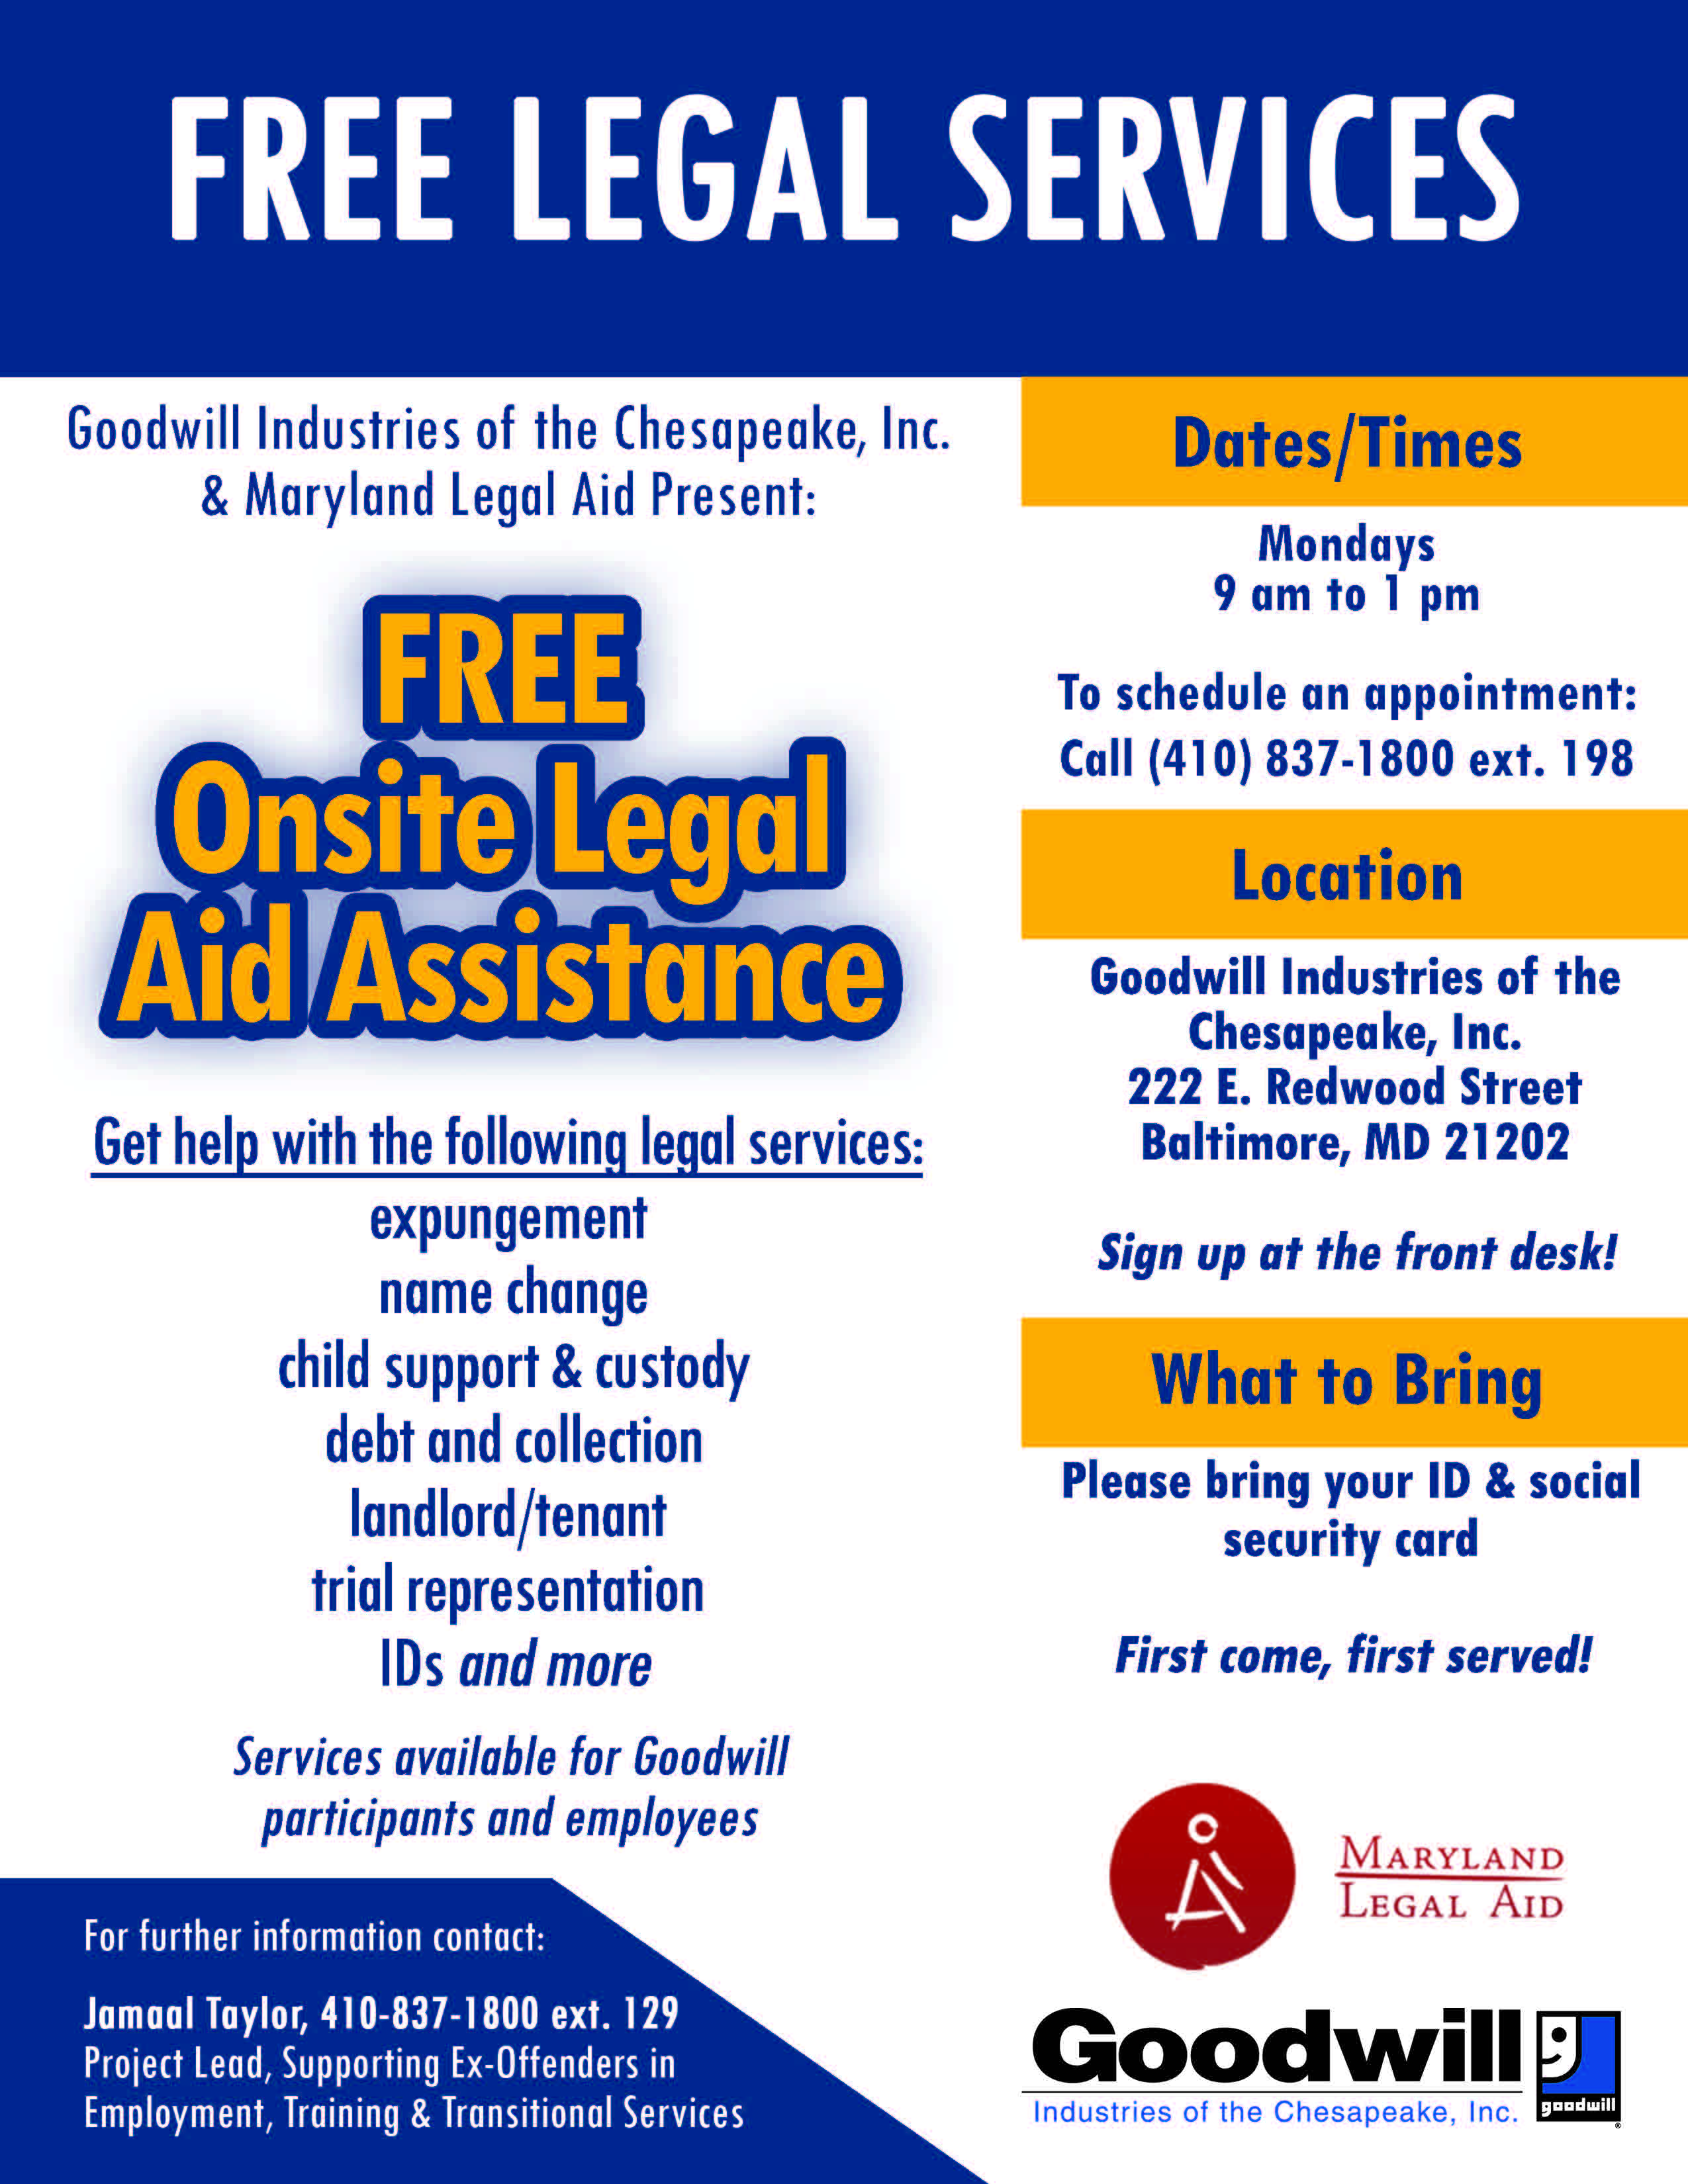 FREE Legal Aid Assistance with Goodwill and Maryland Legal Aid